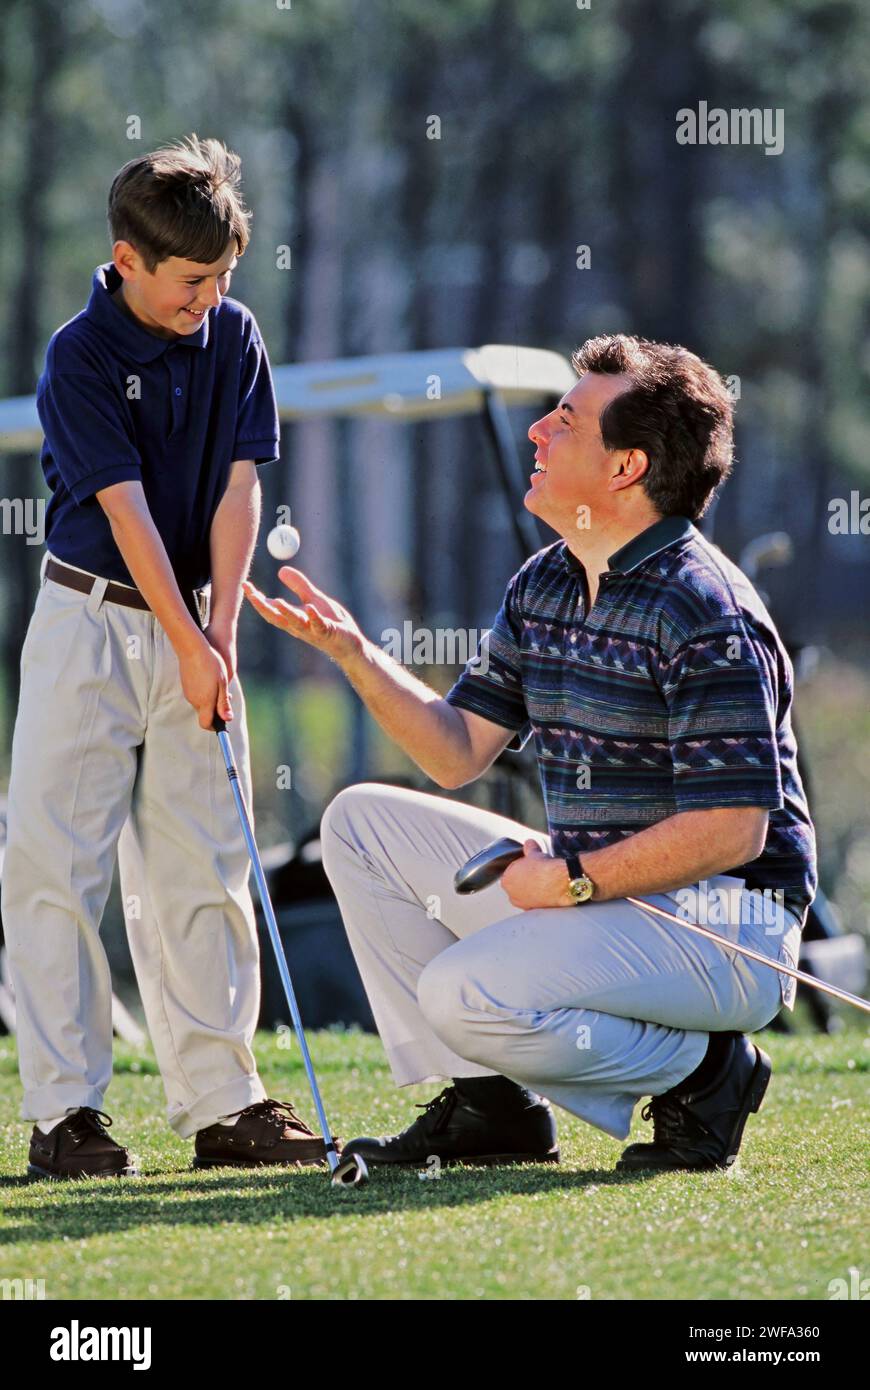 A father is giving a golf lesson to a his son on a lush green course on a bright and sunny day. Stock Photo